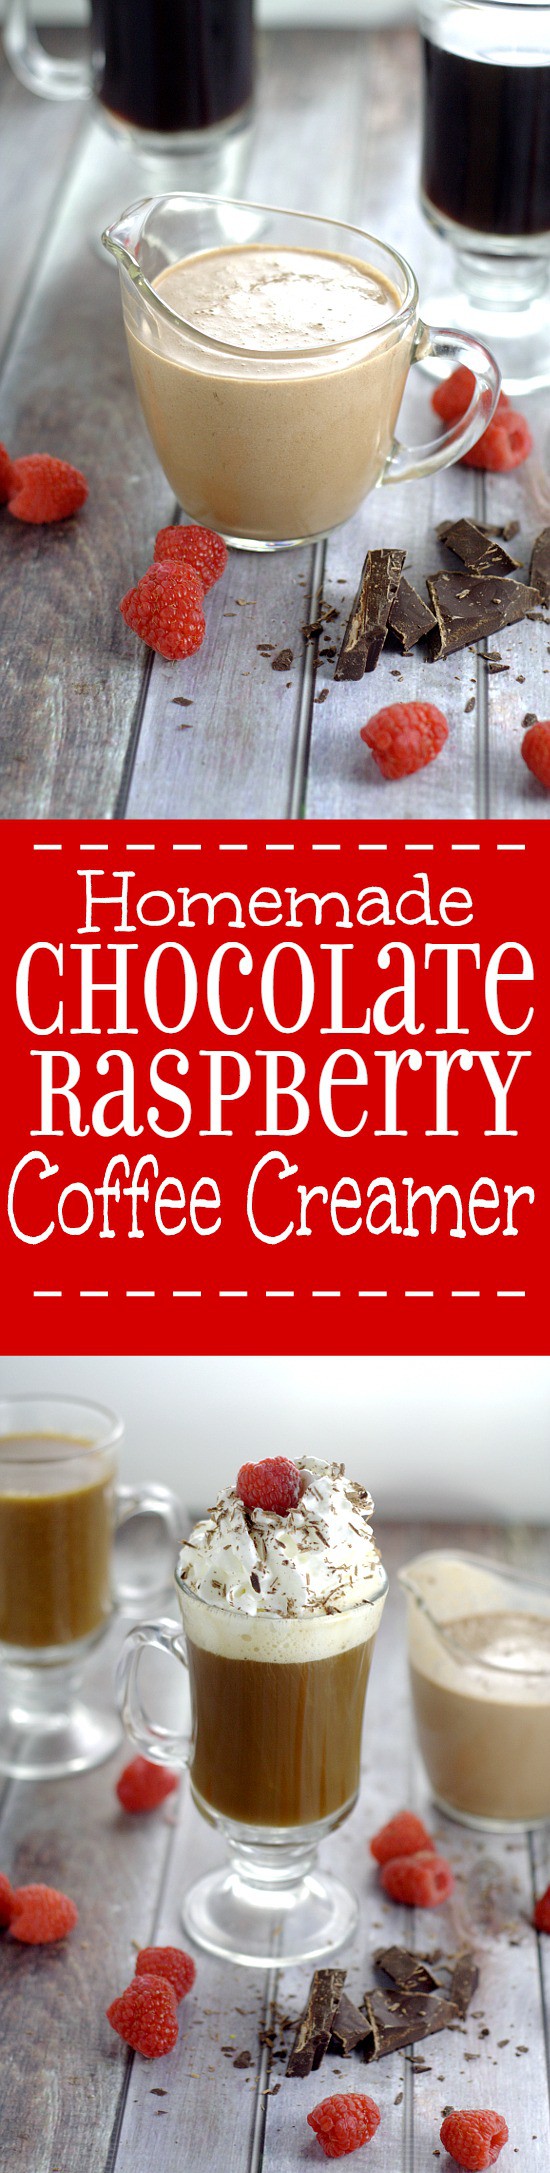 Homemade Chocolate Raspberry Coffee Creamer. Rich, decadent Homemade Chocolate Raspberry Coffee Creamer with smooth, creamy chocolate and a fruity kick of raspberries is sure to transform your coffee into an amazing, indulgent treat. Make some gourmet coffee at home! This would be delicious for Valentine's Day too!